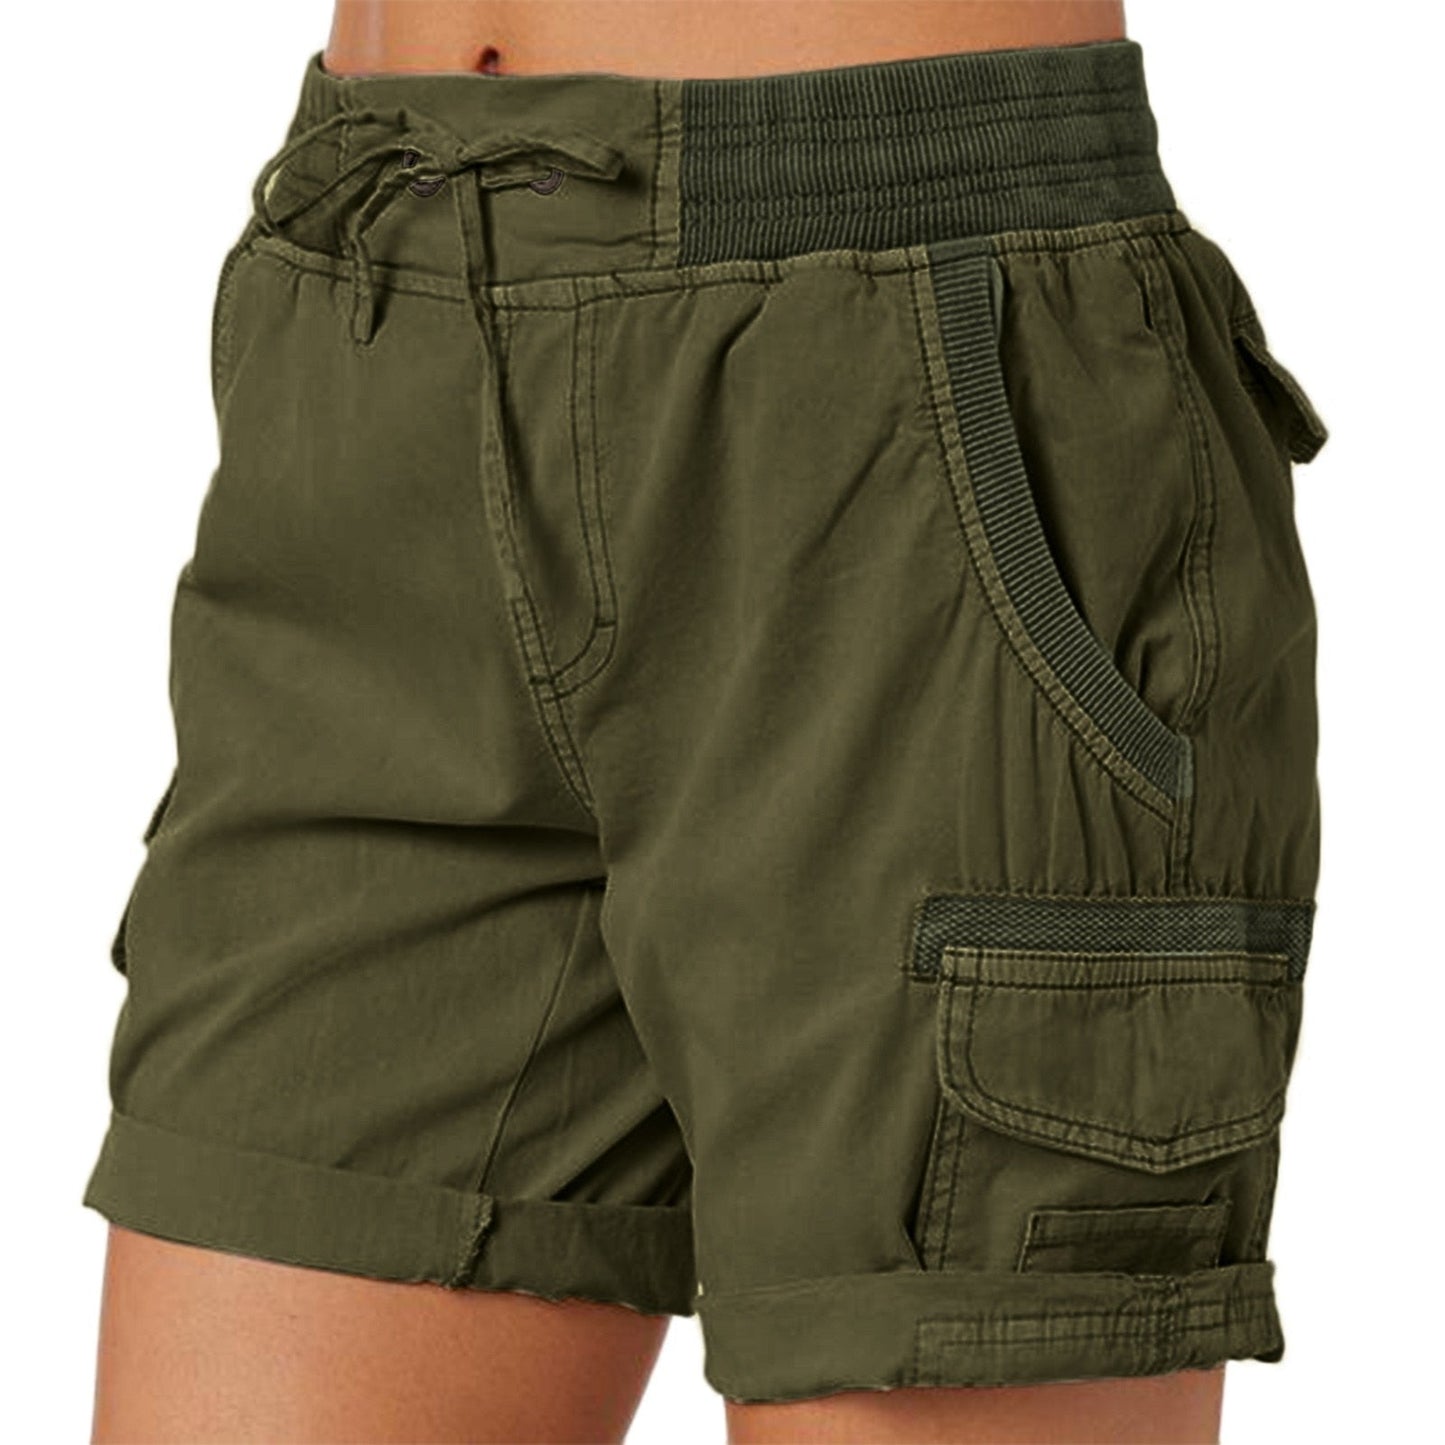 Cargo Shorts Women Loose With Pockets Short